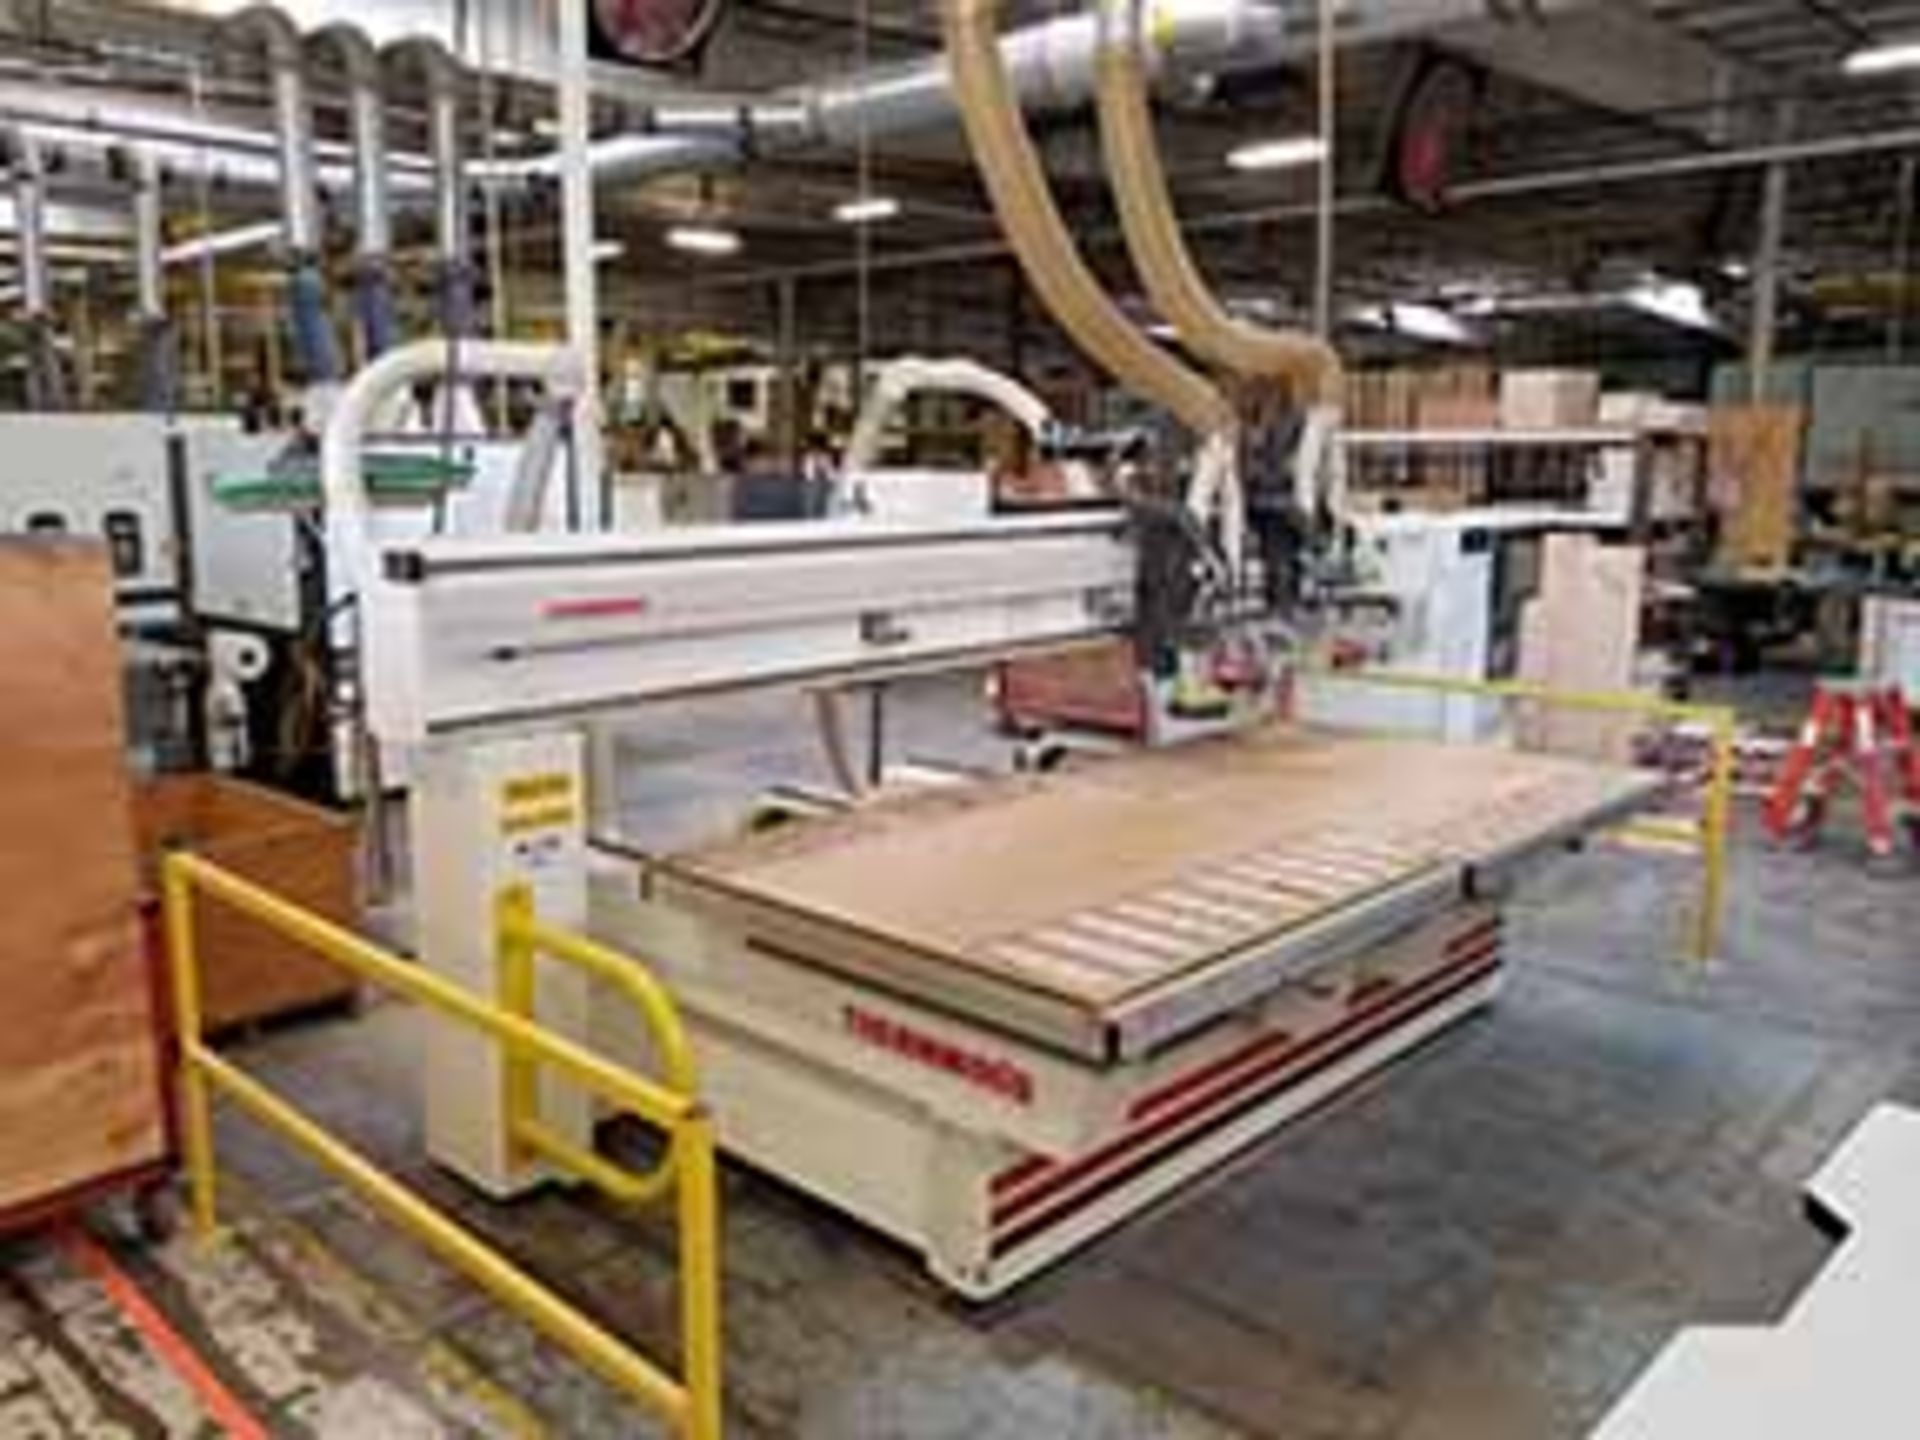 THERMWOOD C42 ROUTER; S/N C42165050, DUAL ROUTER HEADS, 151'' ROUTER TRAVEL, DUAL 5' X 5' SLIDING - Image 7 of 9